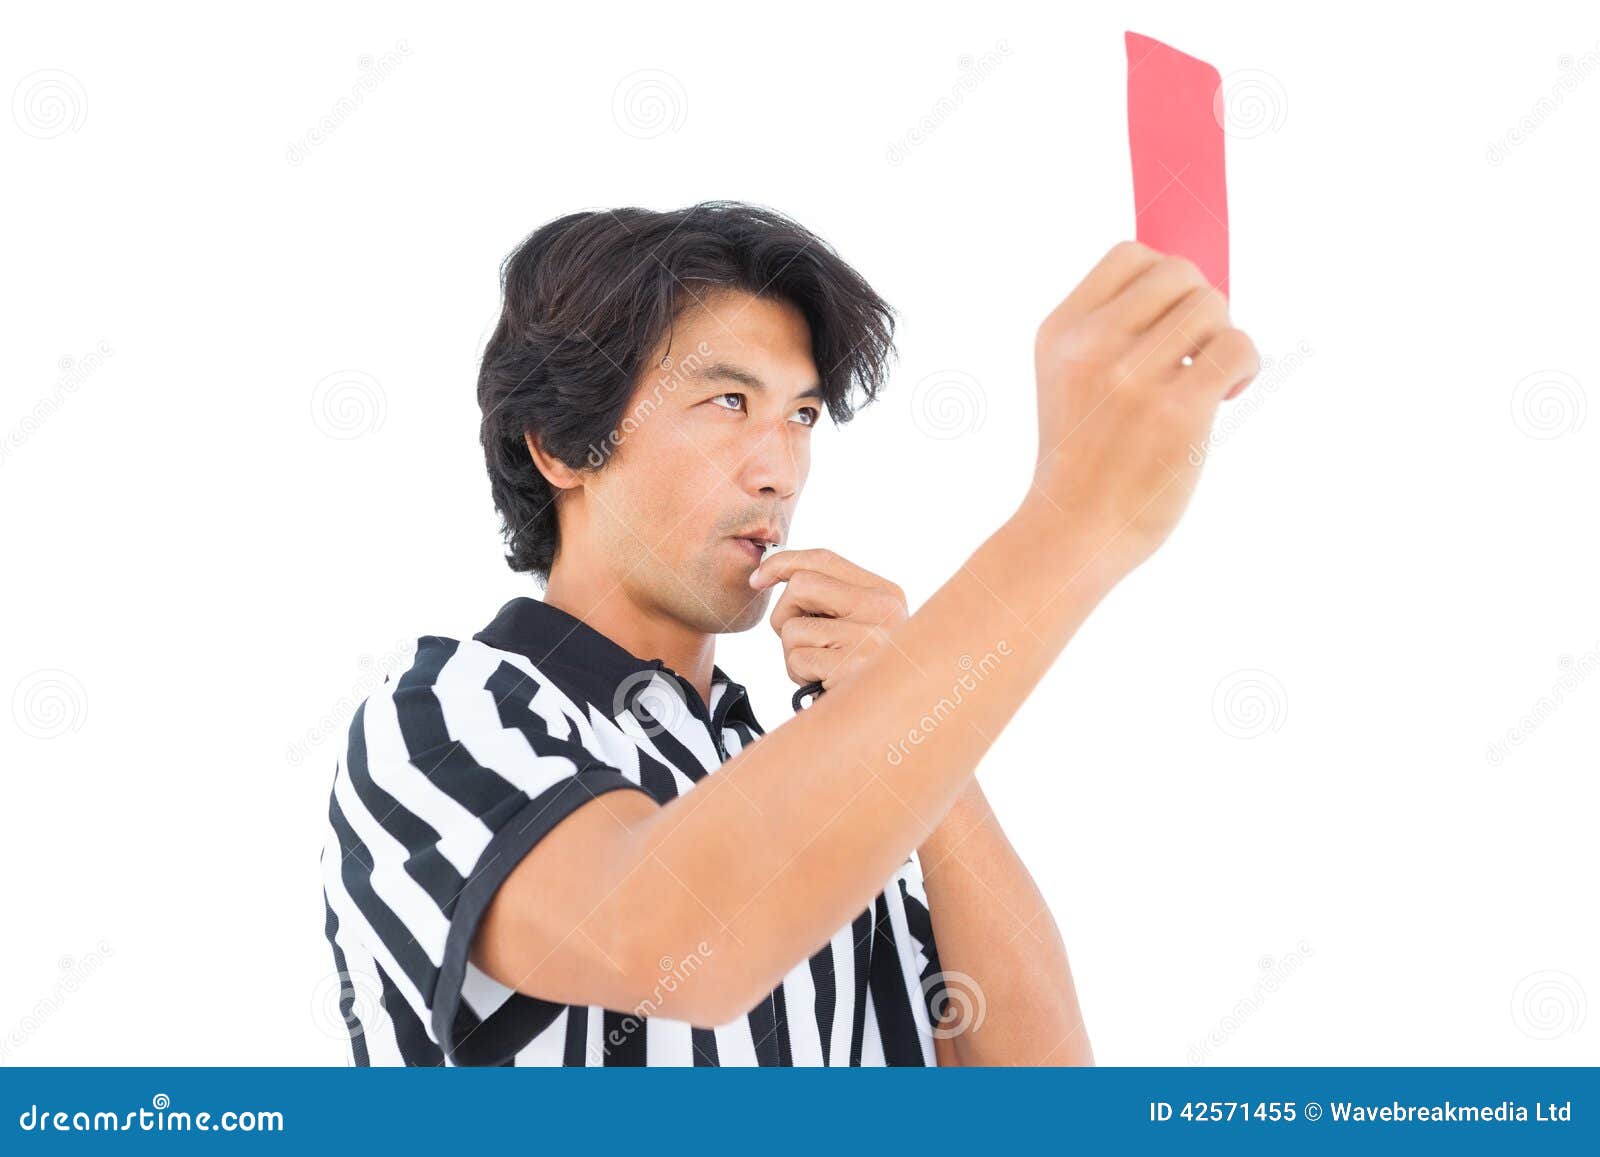 Stern referee showing red card Stock Photo by ©Wavebreakmedia 50051525